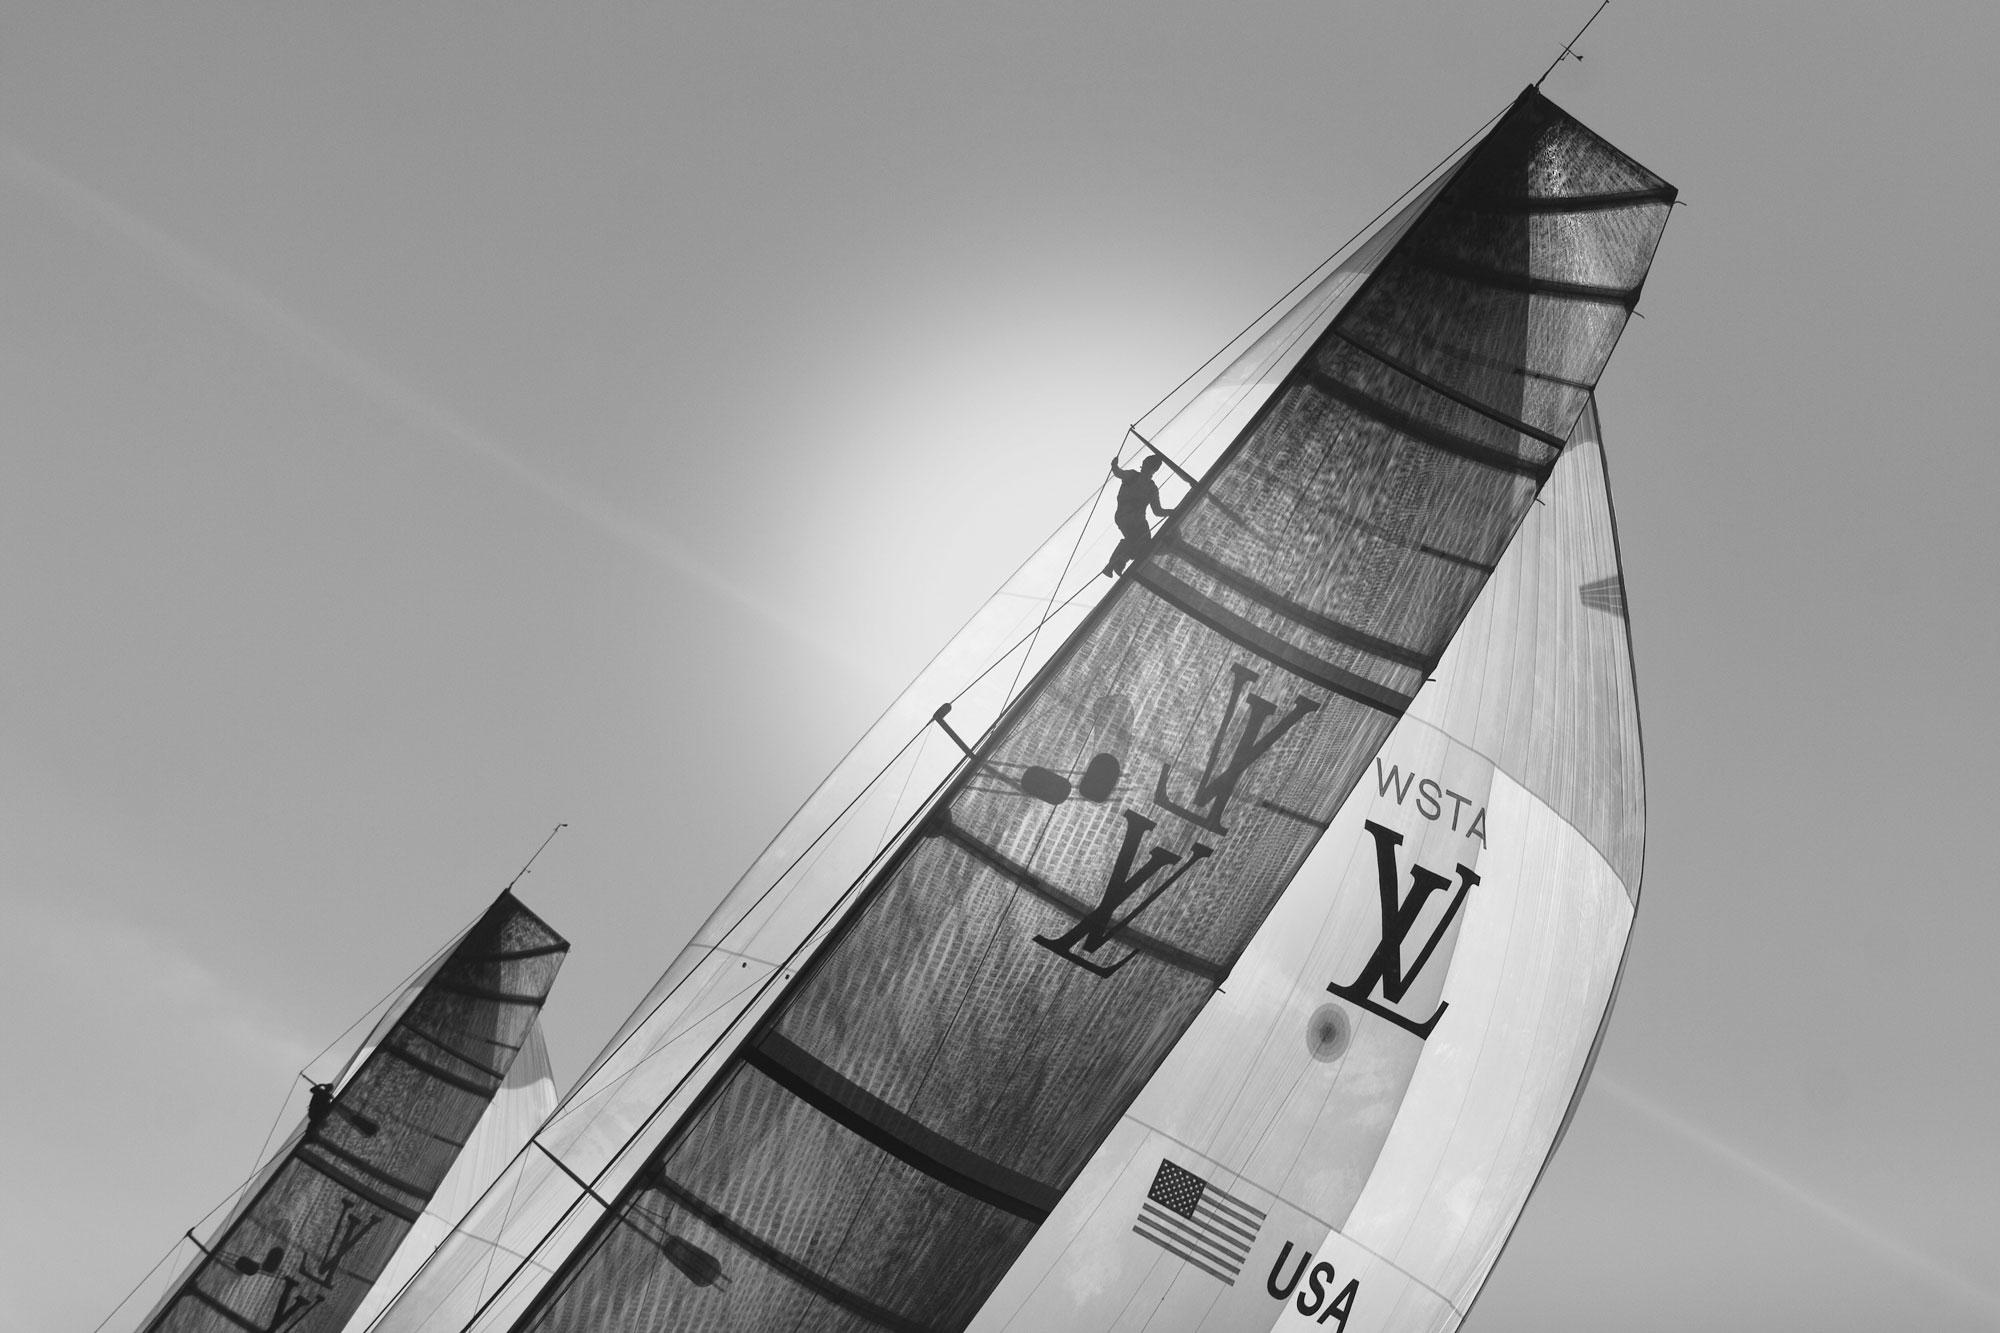 The Louis Vuitton Cup challenger series begins!